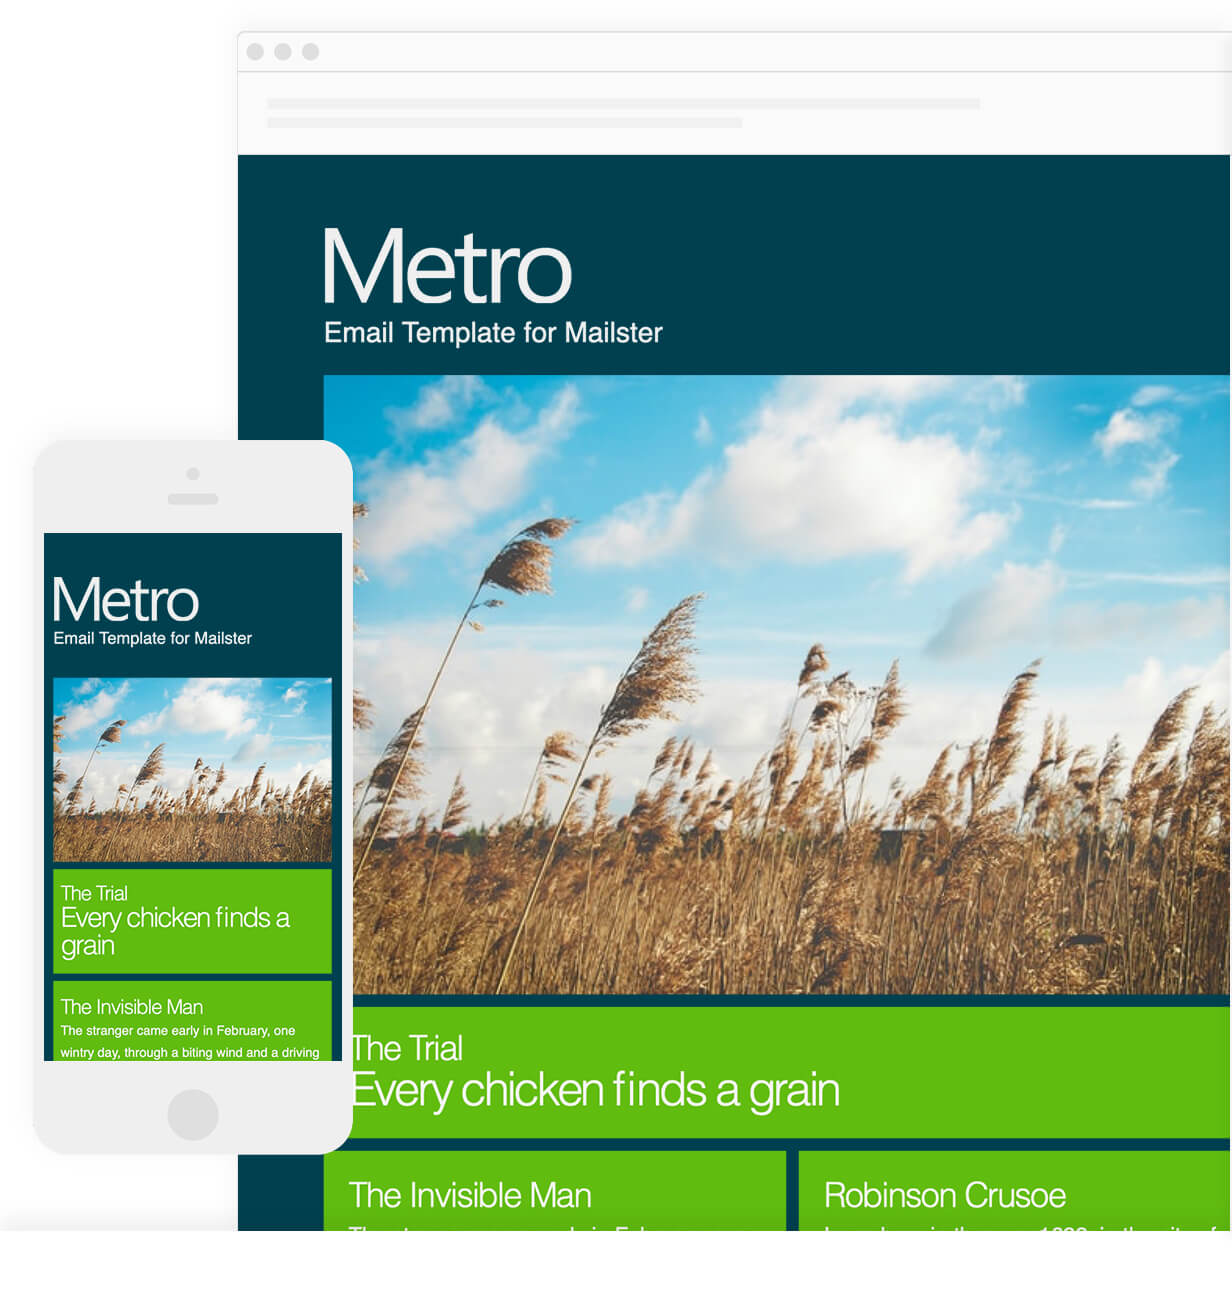 Metro - Email Template for Mailster - 7